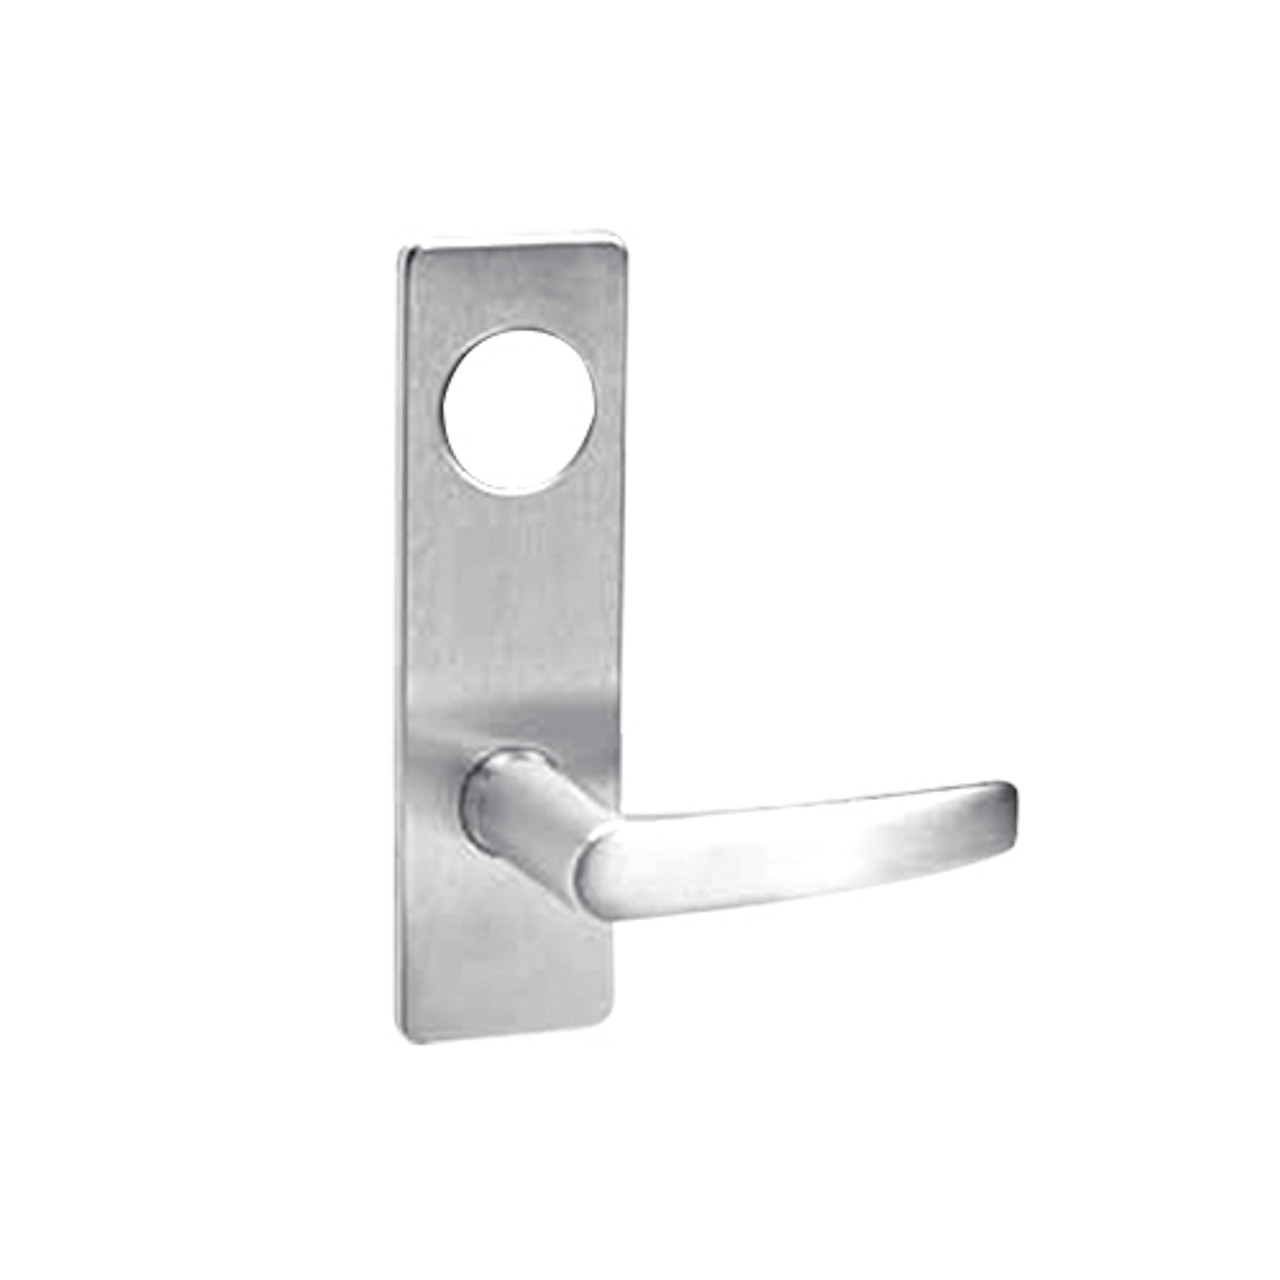 ML2056-ASP-629-LC Corbin Russwin ML2000 Series Mortise Classroom Locksets with Armstrong Lever in Bright Stainless Steel